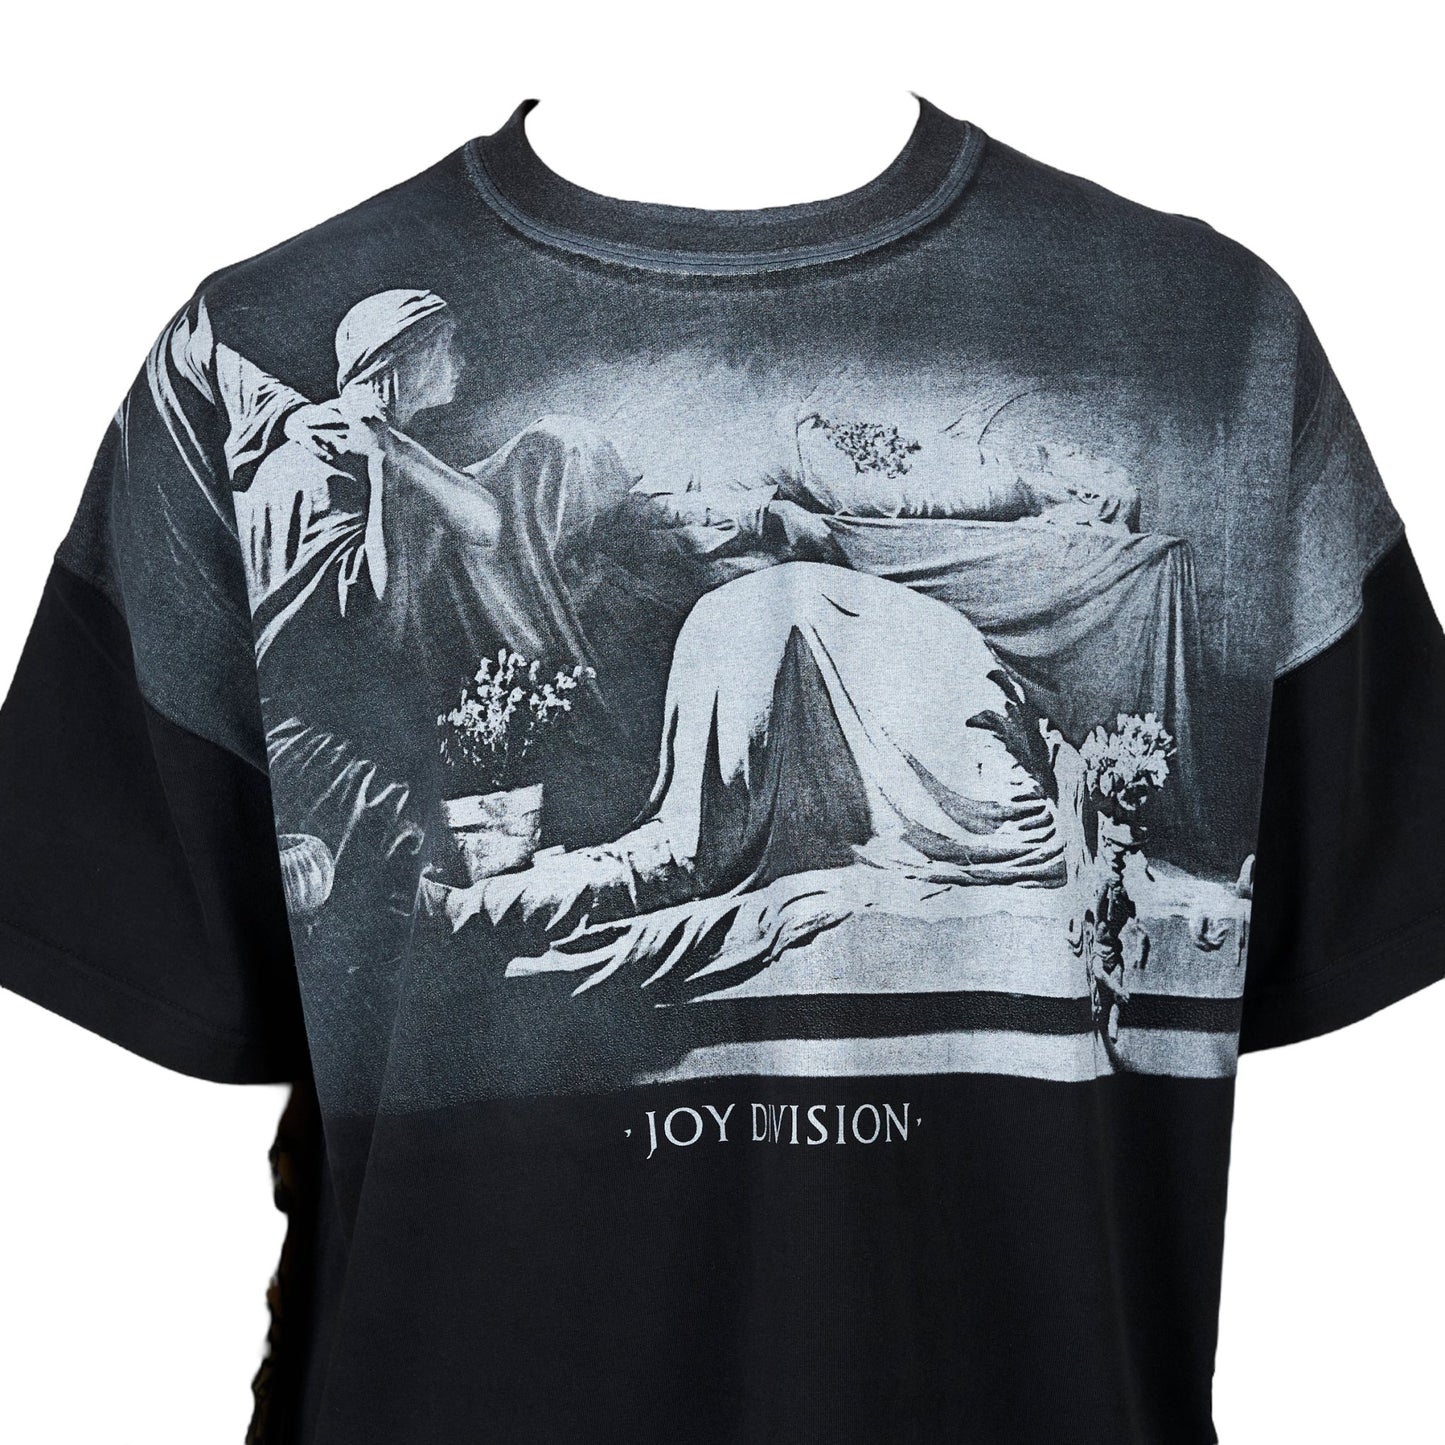 Black oversized cotton jersey PLEASURES ATROCITY TEE BLK with a white plastisol graphic print featuring a draped figure and the text "joy division" below, an official collaboration with Joy Division.